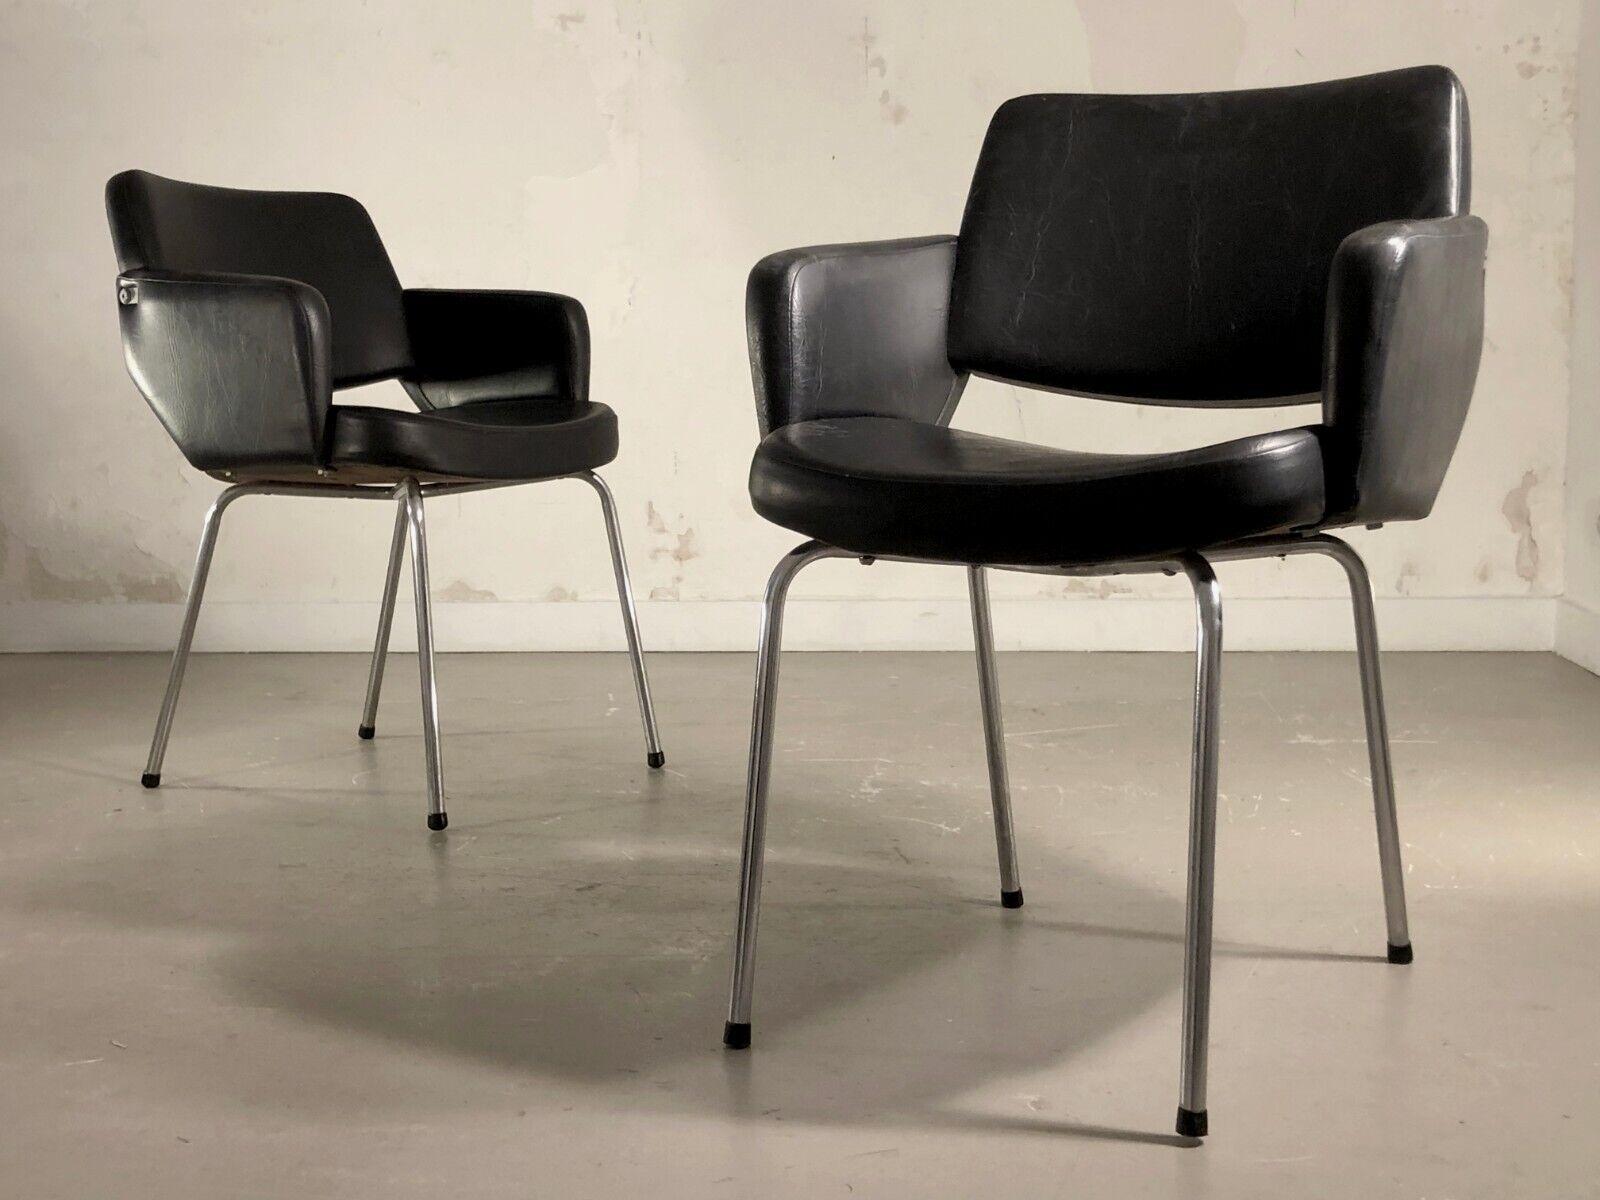 A Pair of MID-CENTURY-MODERN CHAIRS in ARP / MOTTE / GUARICHE Style, France 1950 For Sale 2